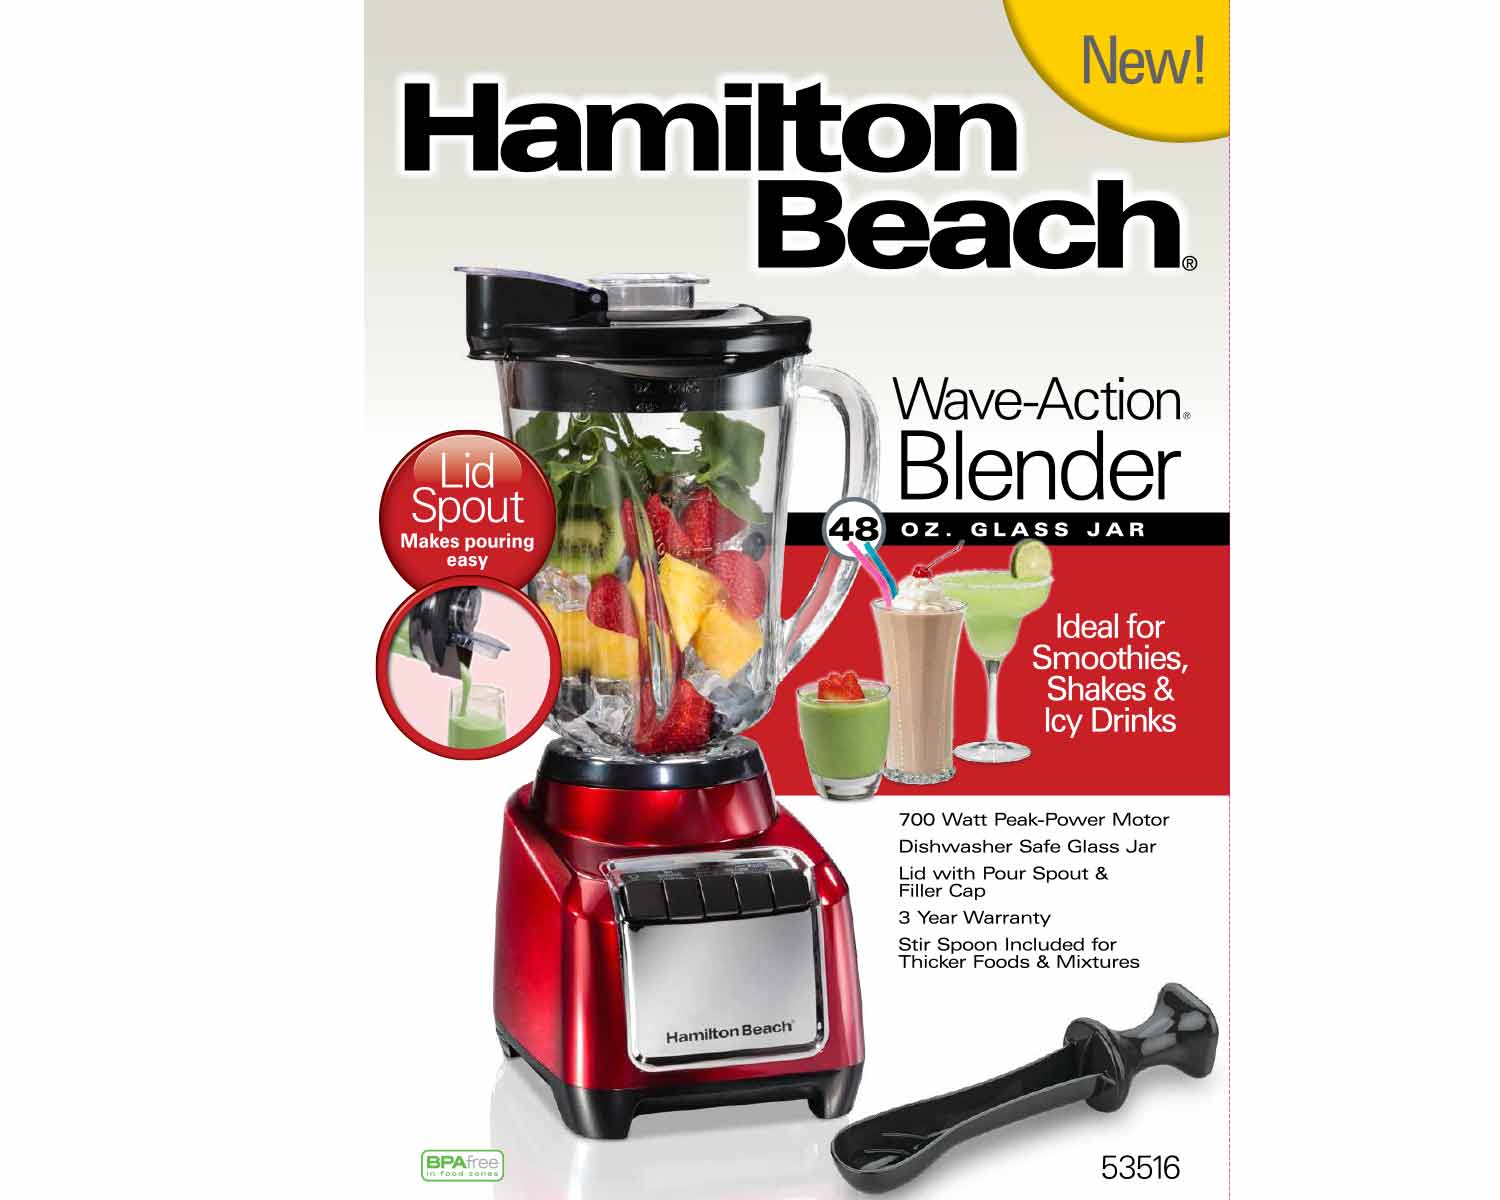 semester storm Inferieur The Weekend Gourmet: Review and Giveaway: Hamilton Beach® Wave~Action®  Blender...Featuring Skinny Berry Cheesecake Smoothie #HamiltonBeachBlenders  #spon #giveaway